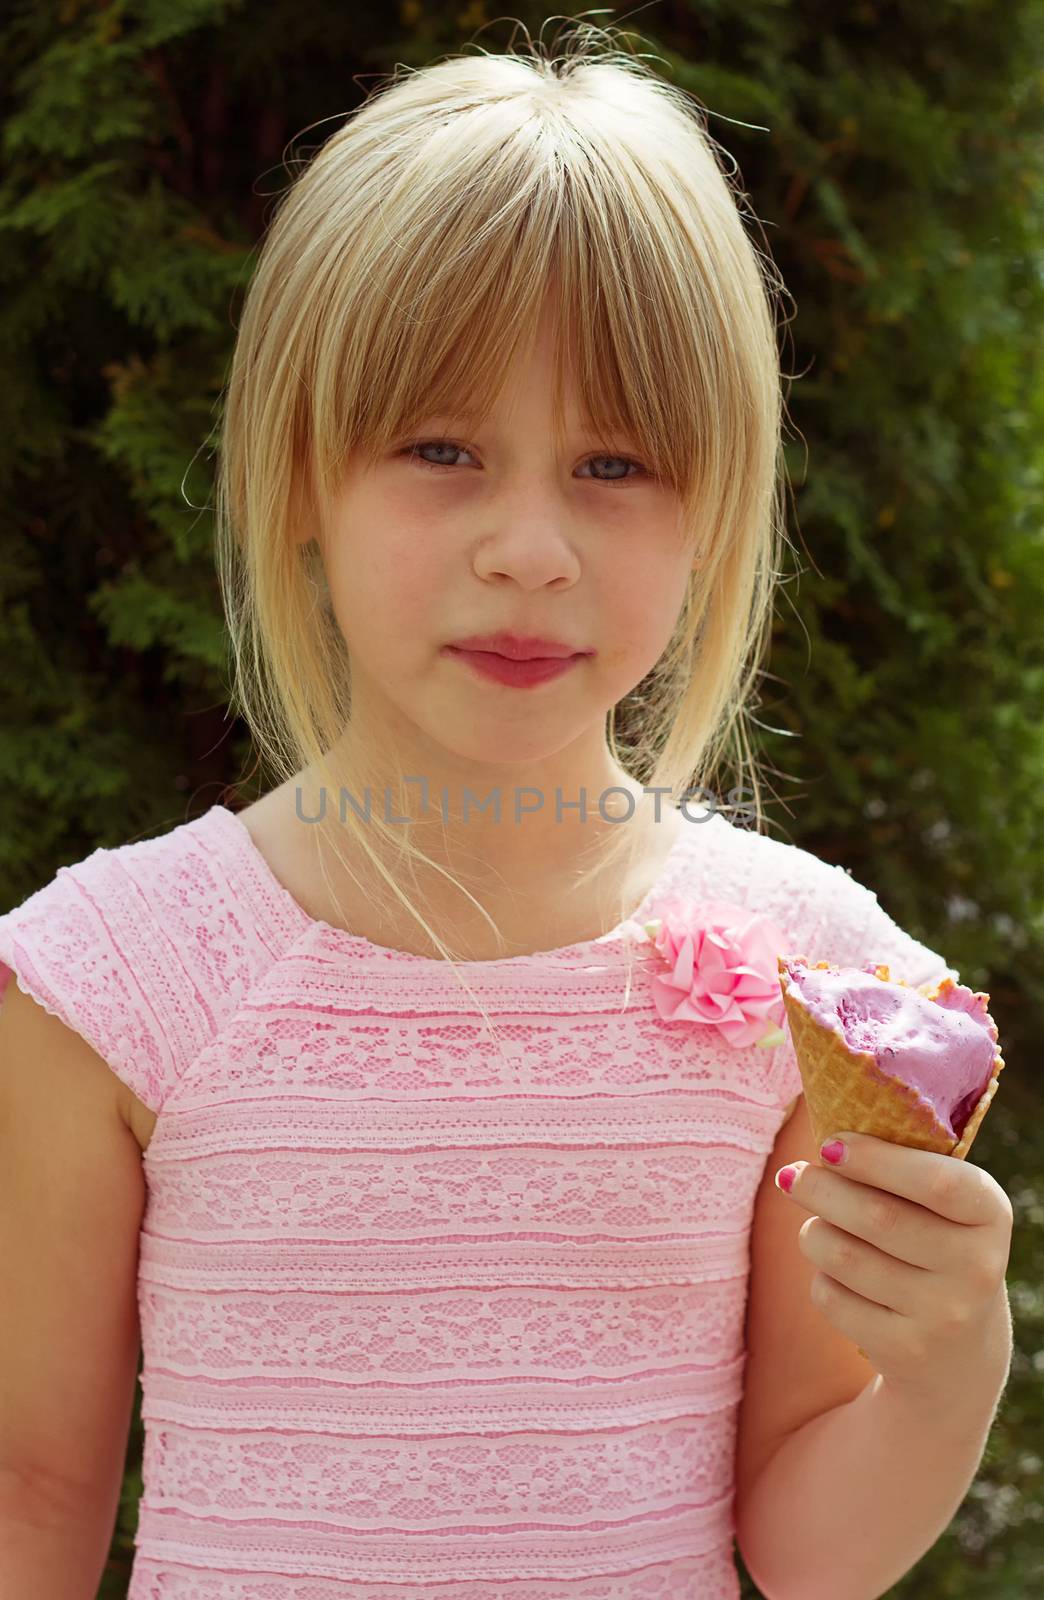 Girl 6 years old in a pink dress with ice cream in hand